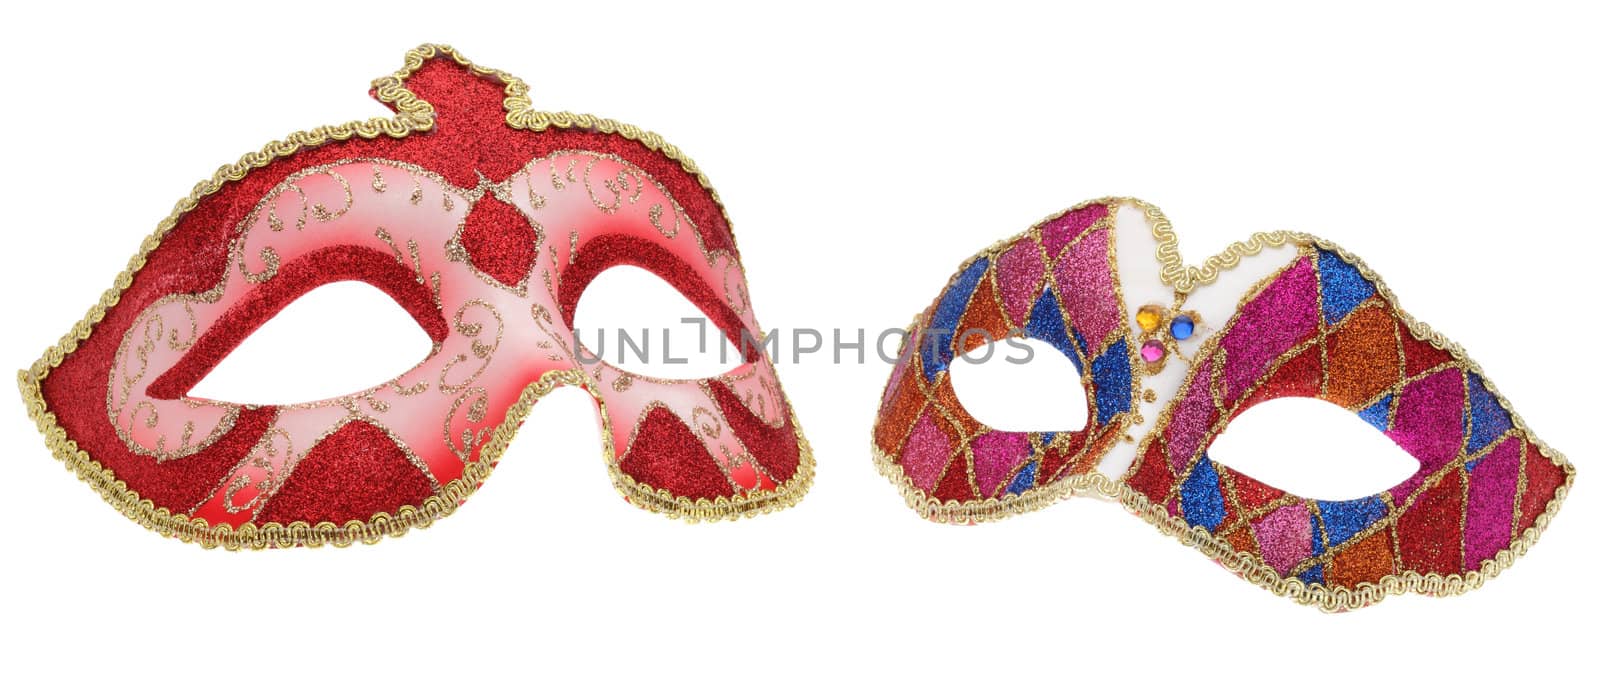 Two venetian masks isolated against a white background.